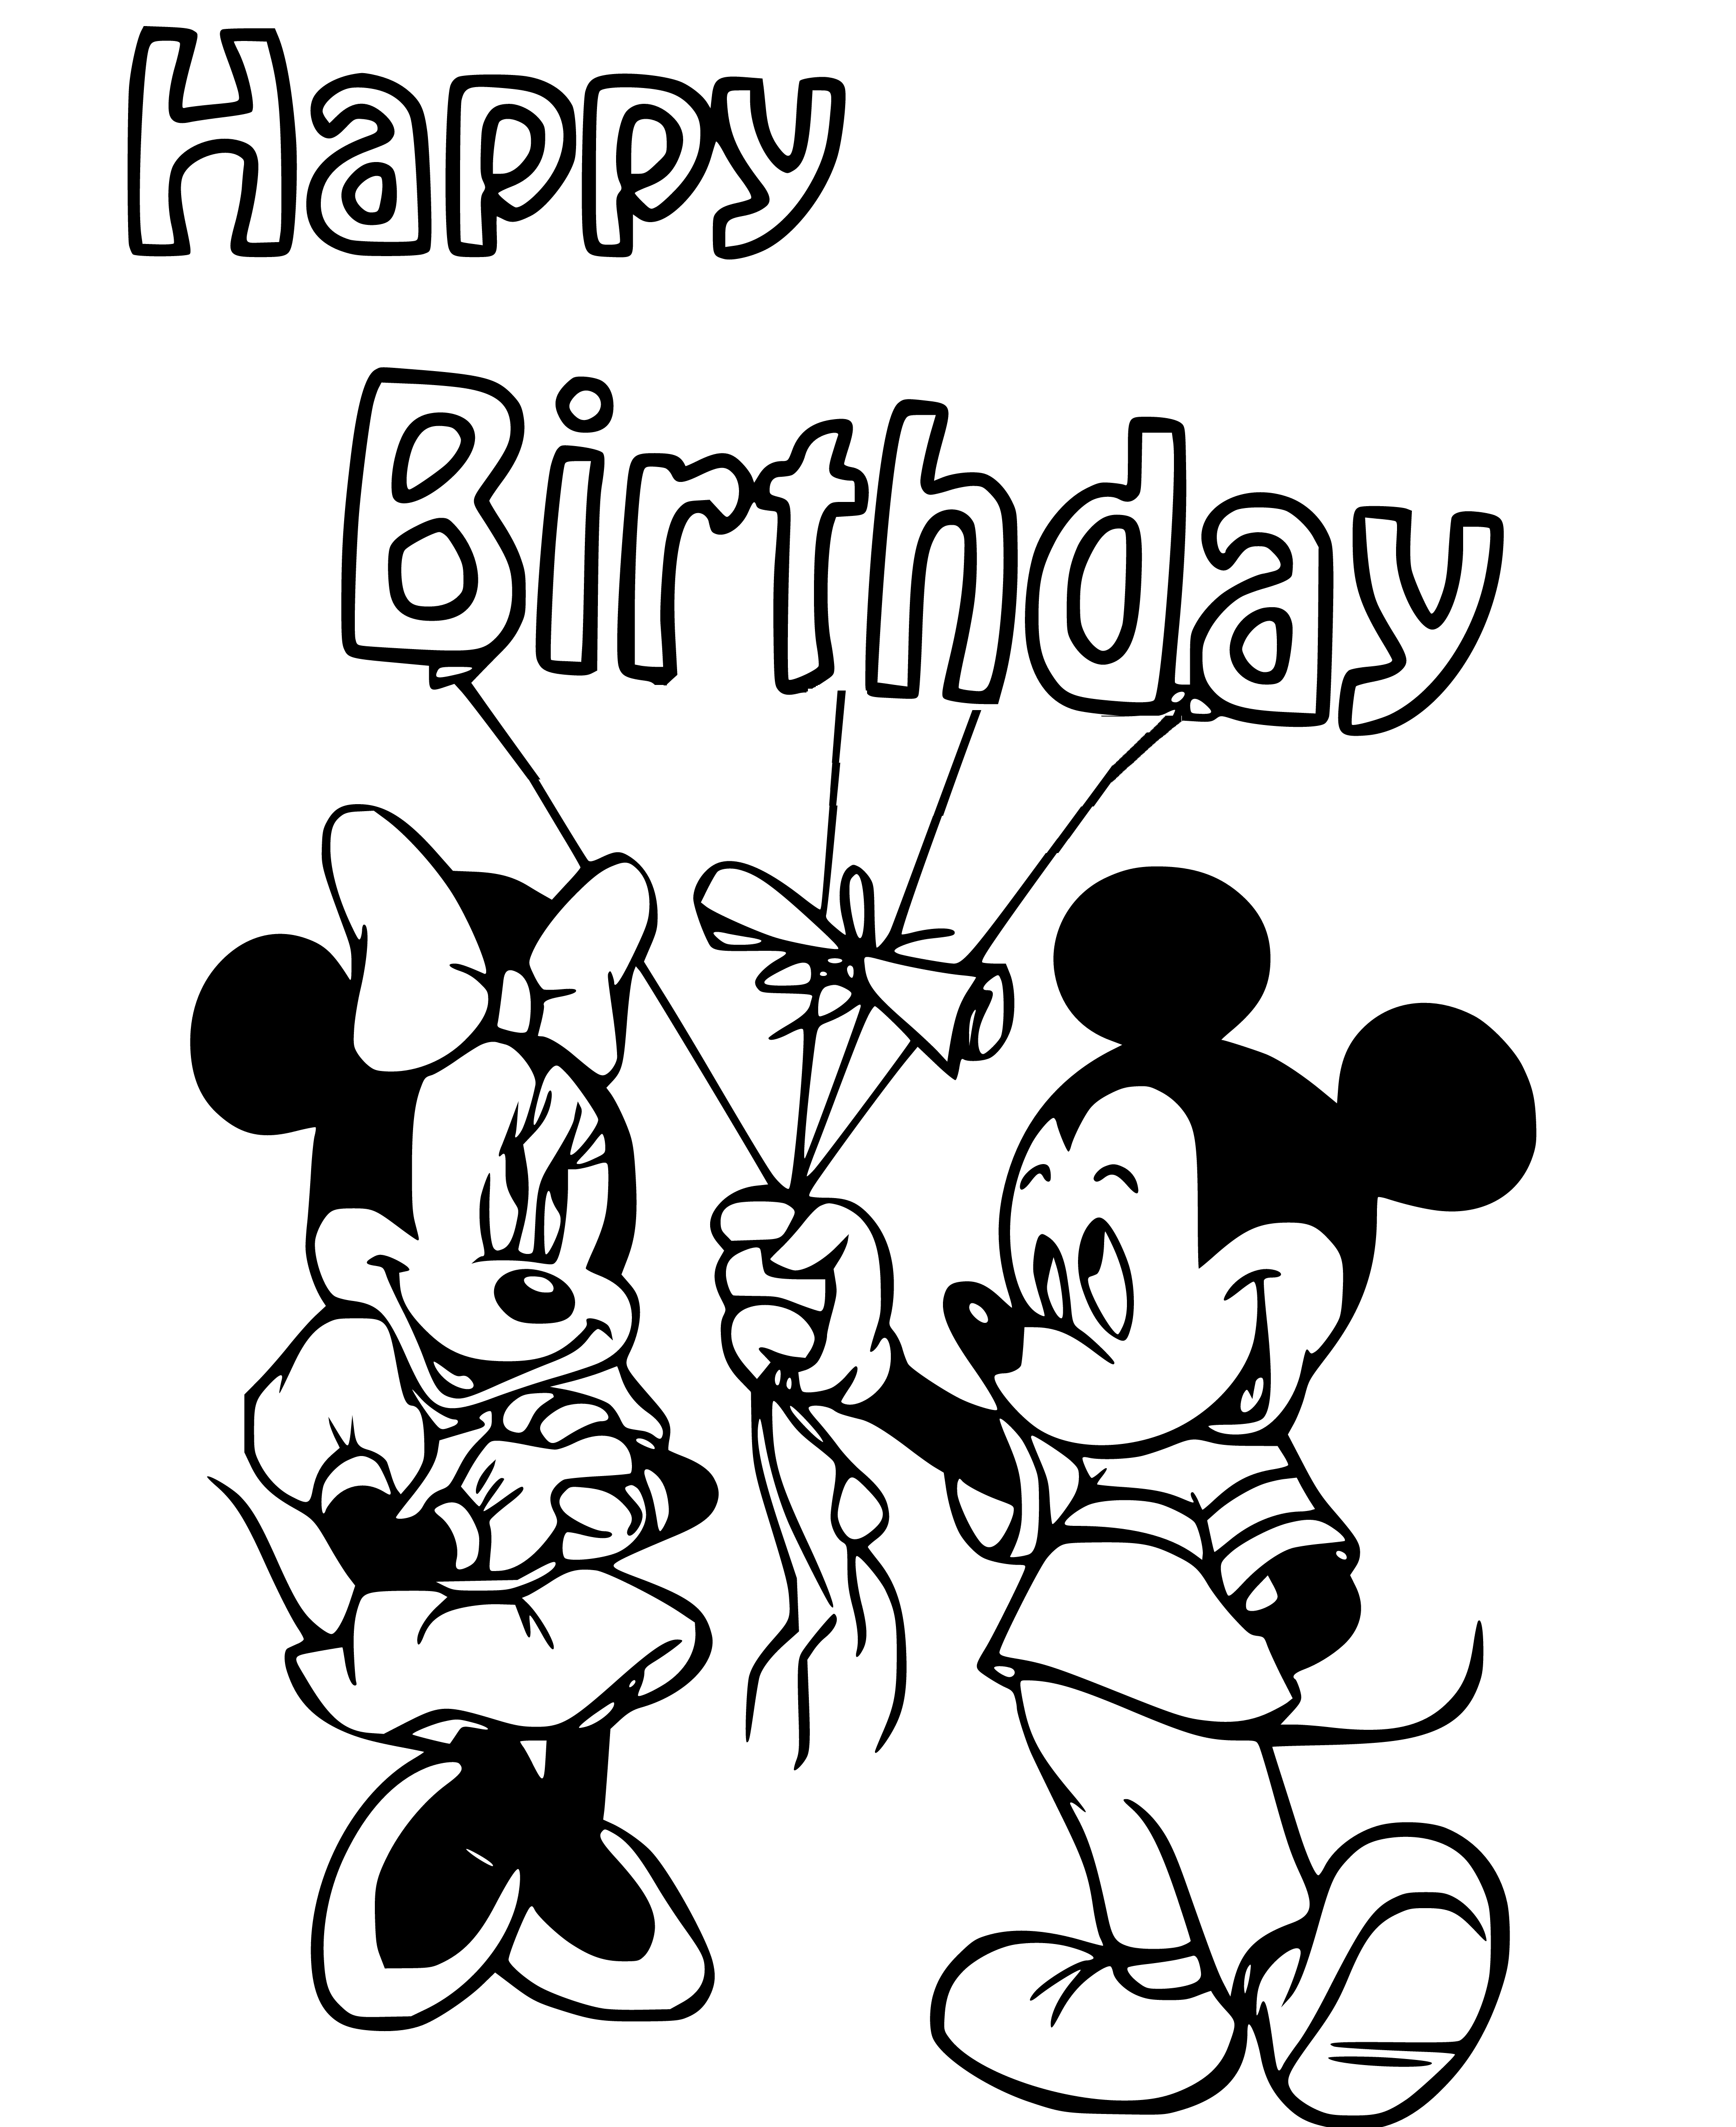 Printable Mickey celebrates Minnie's Birthday Coloring Page for kids.